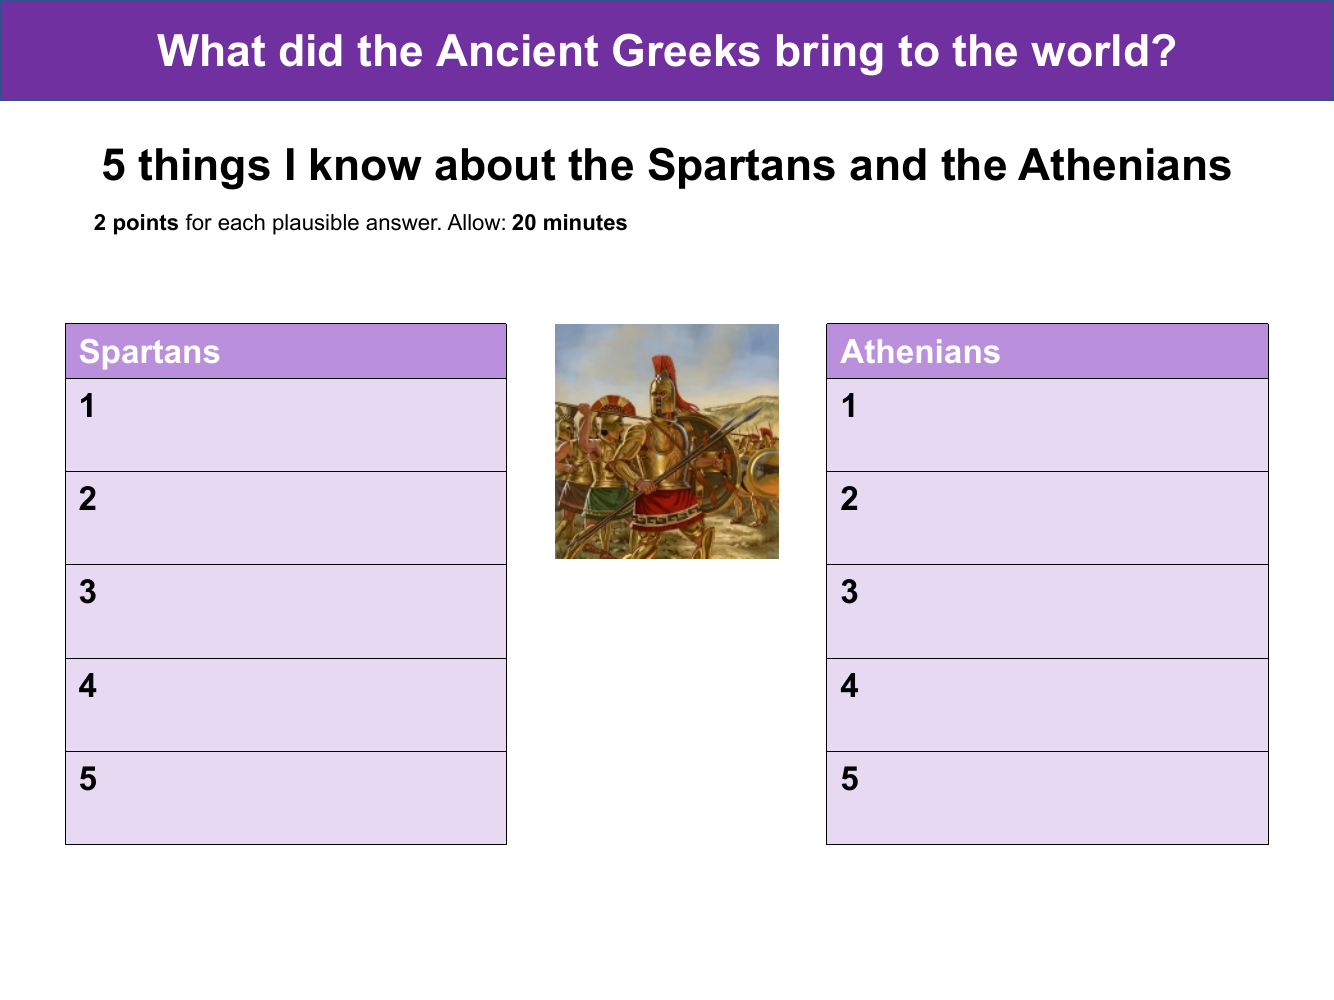 Five things I know about the Spartans and the Athenians